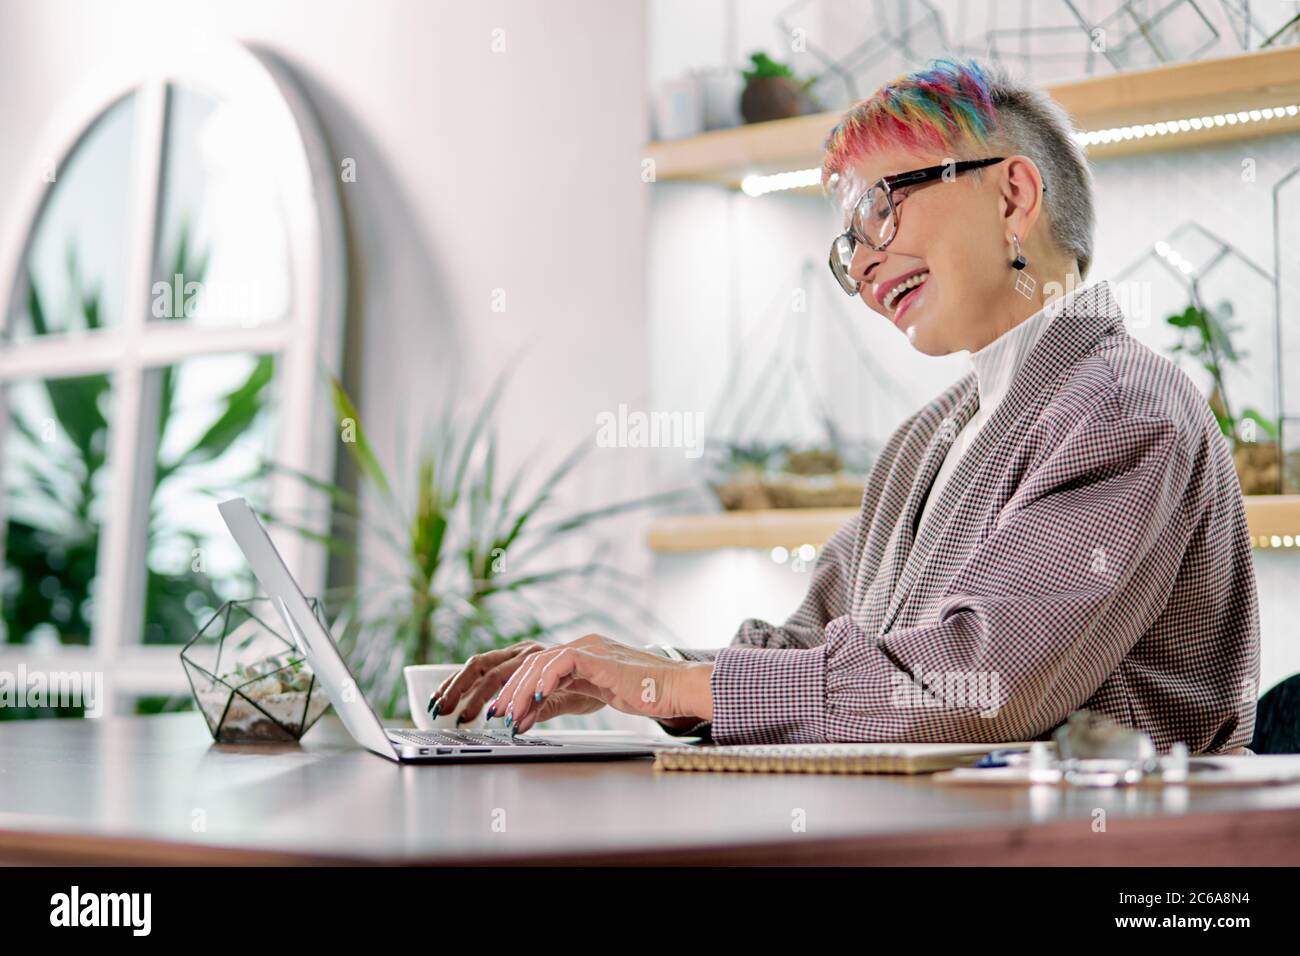 Using modern technologies by mature people. Gorgeous business woman with  short colorful hair wearing glasses and blazer sit looking at screen of  lapto Stock Photo - Alamy